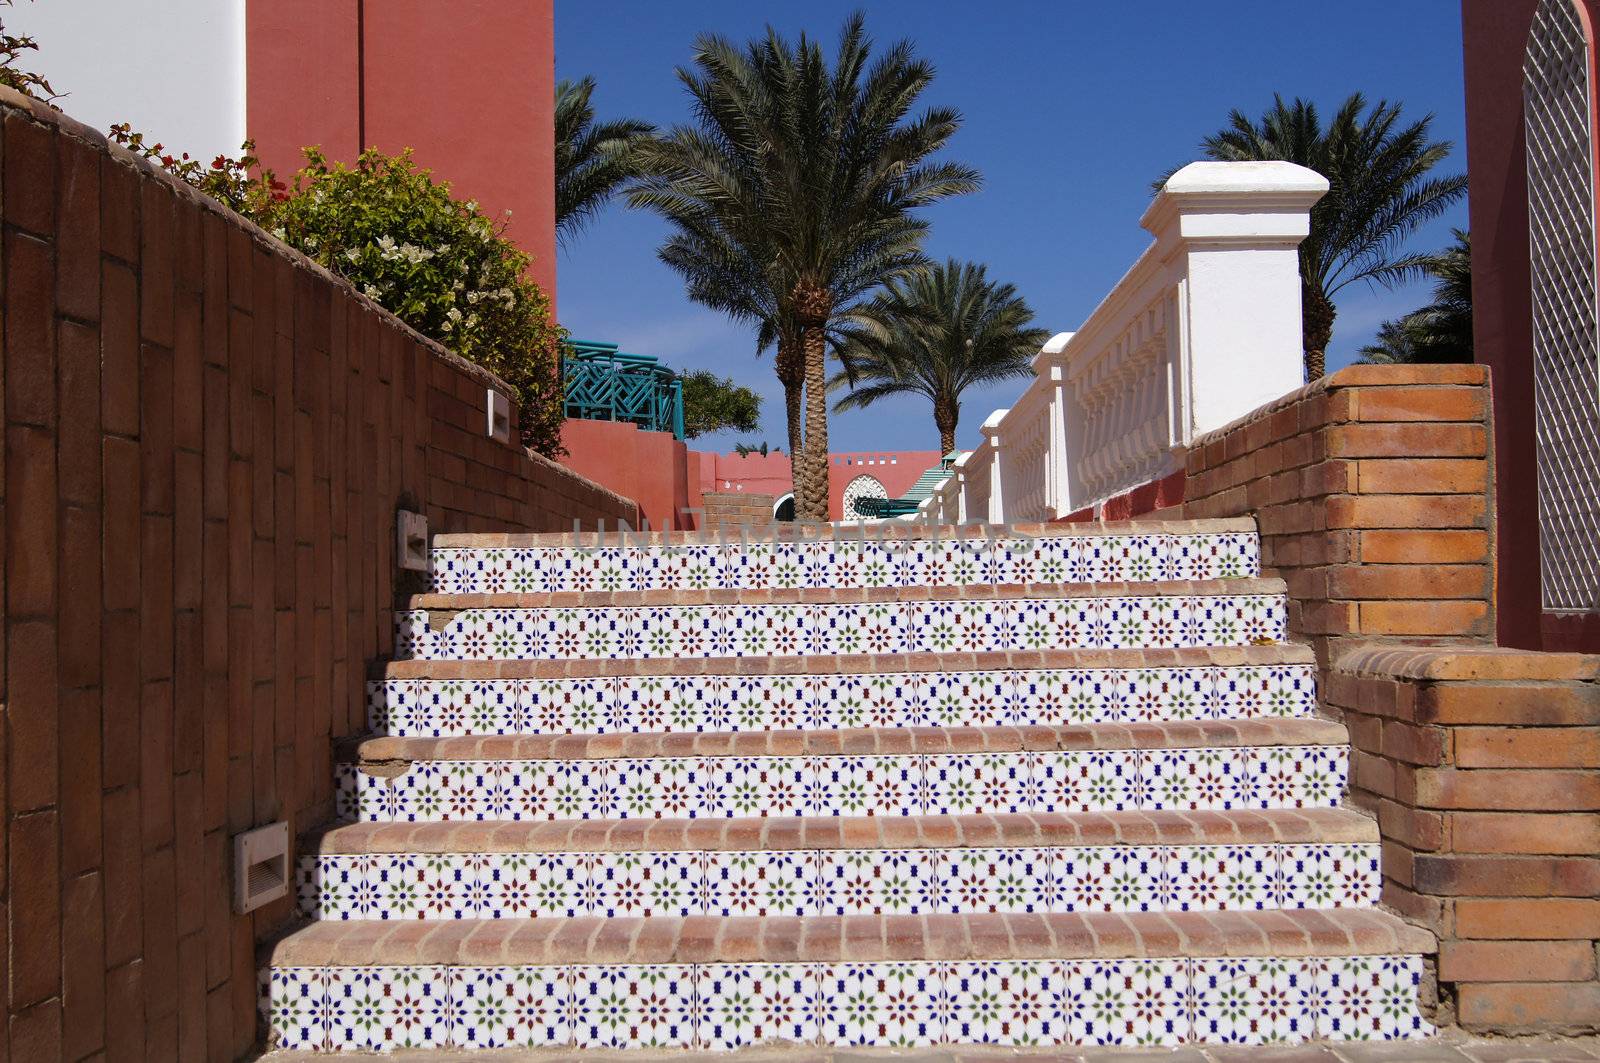 Courtyard of mediterranean villa with ceramic tile walkway and blooming bushes in Egypt                